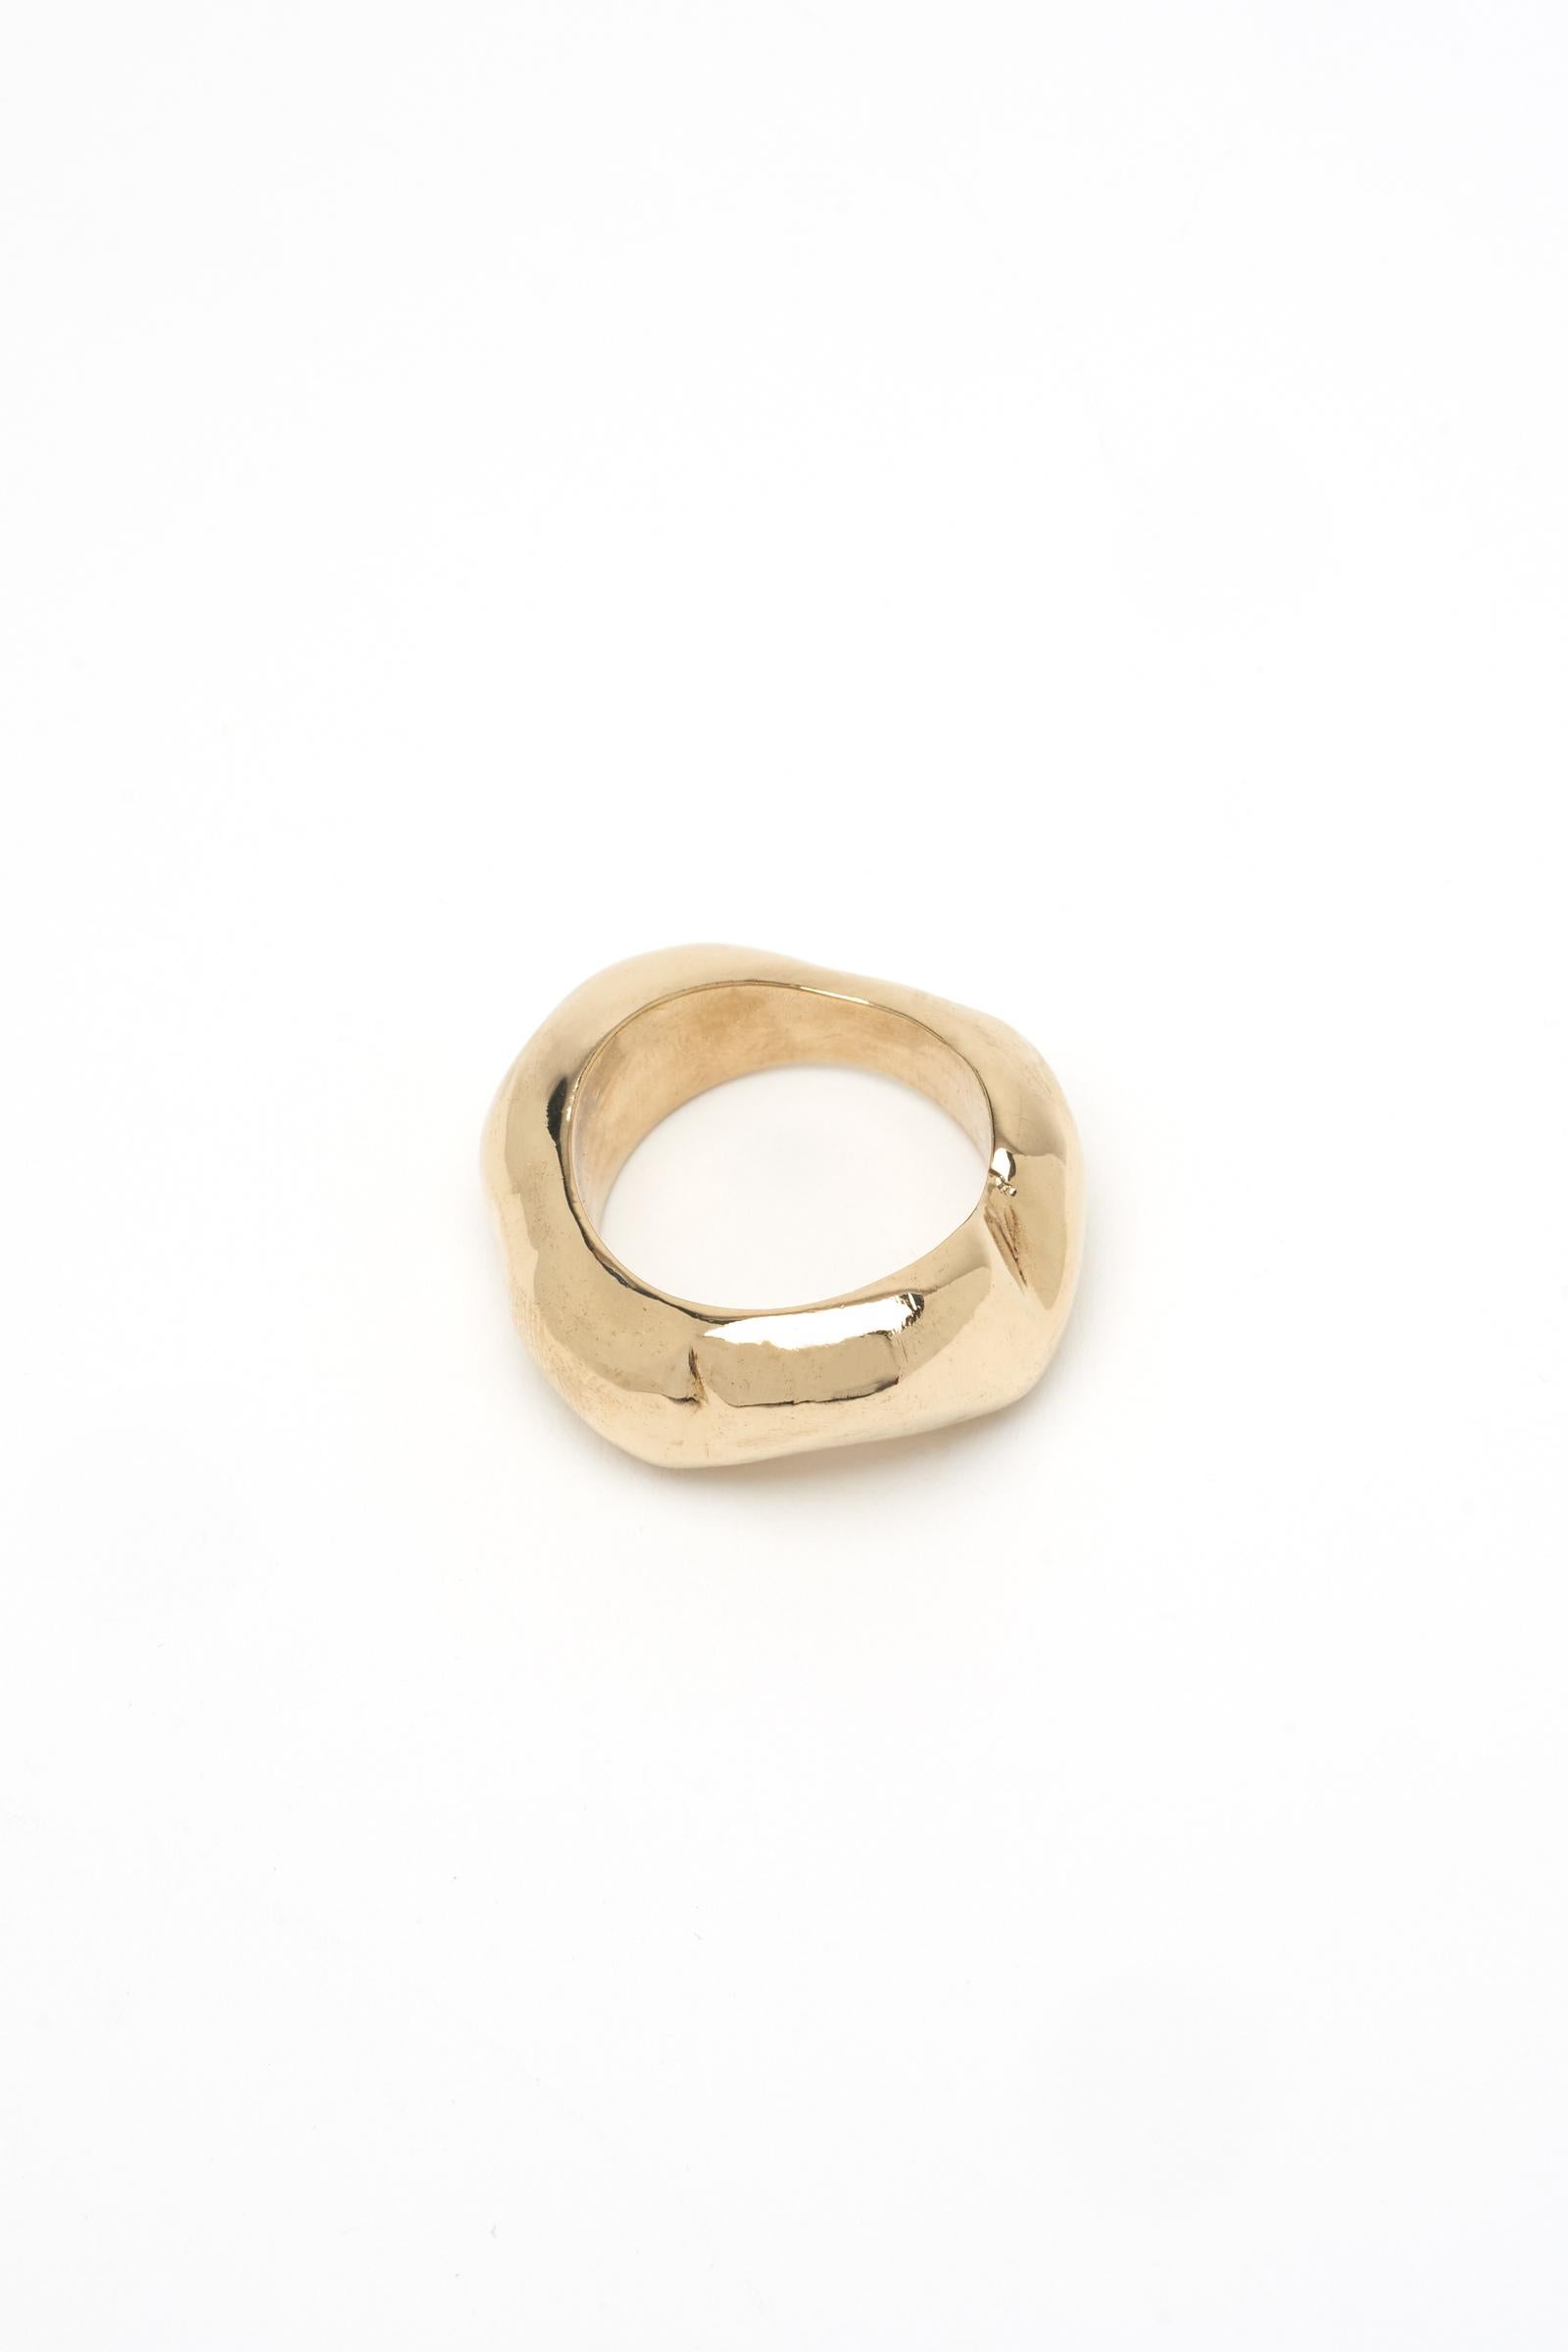 S A D É. Heirloom Ring in 14 Karat White or Yellow Gold For Sale 2